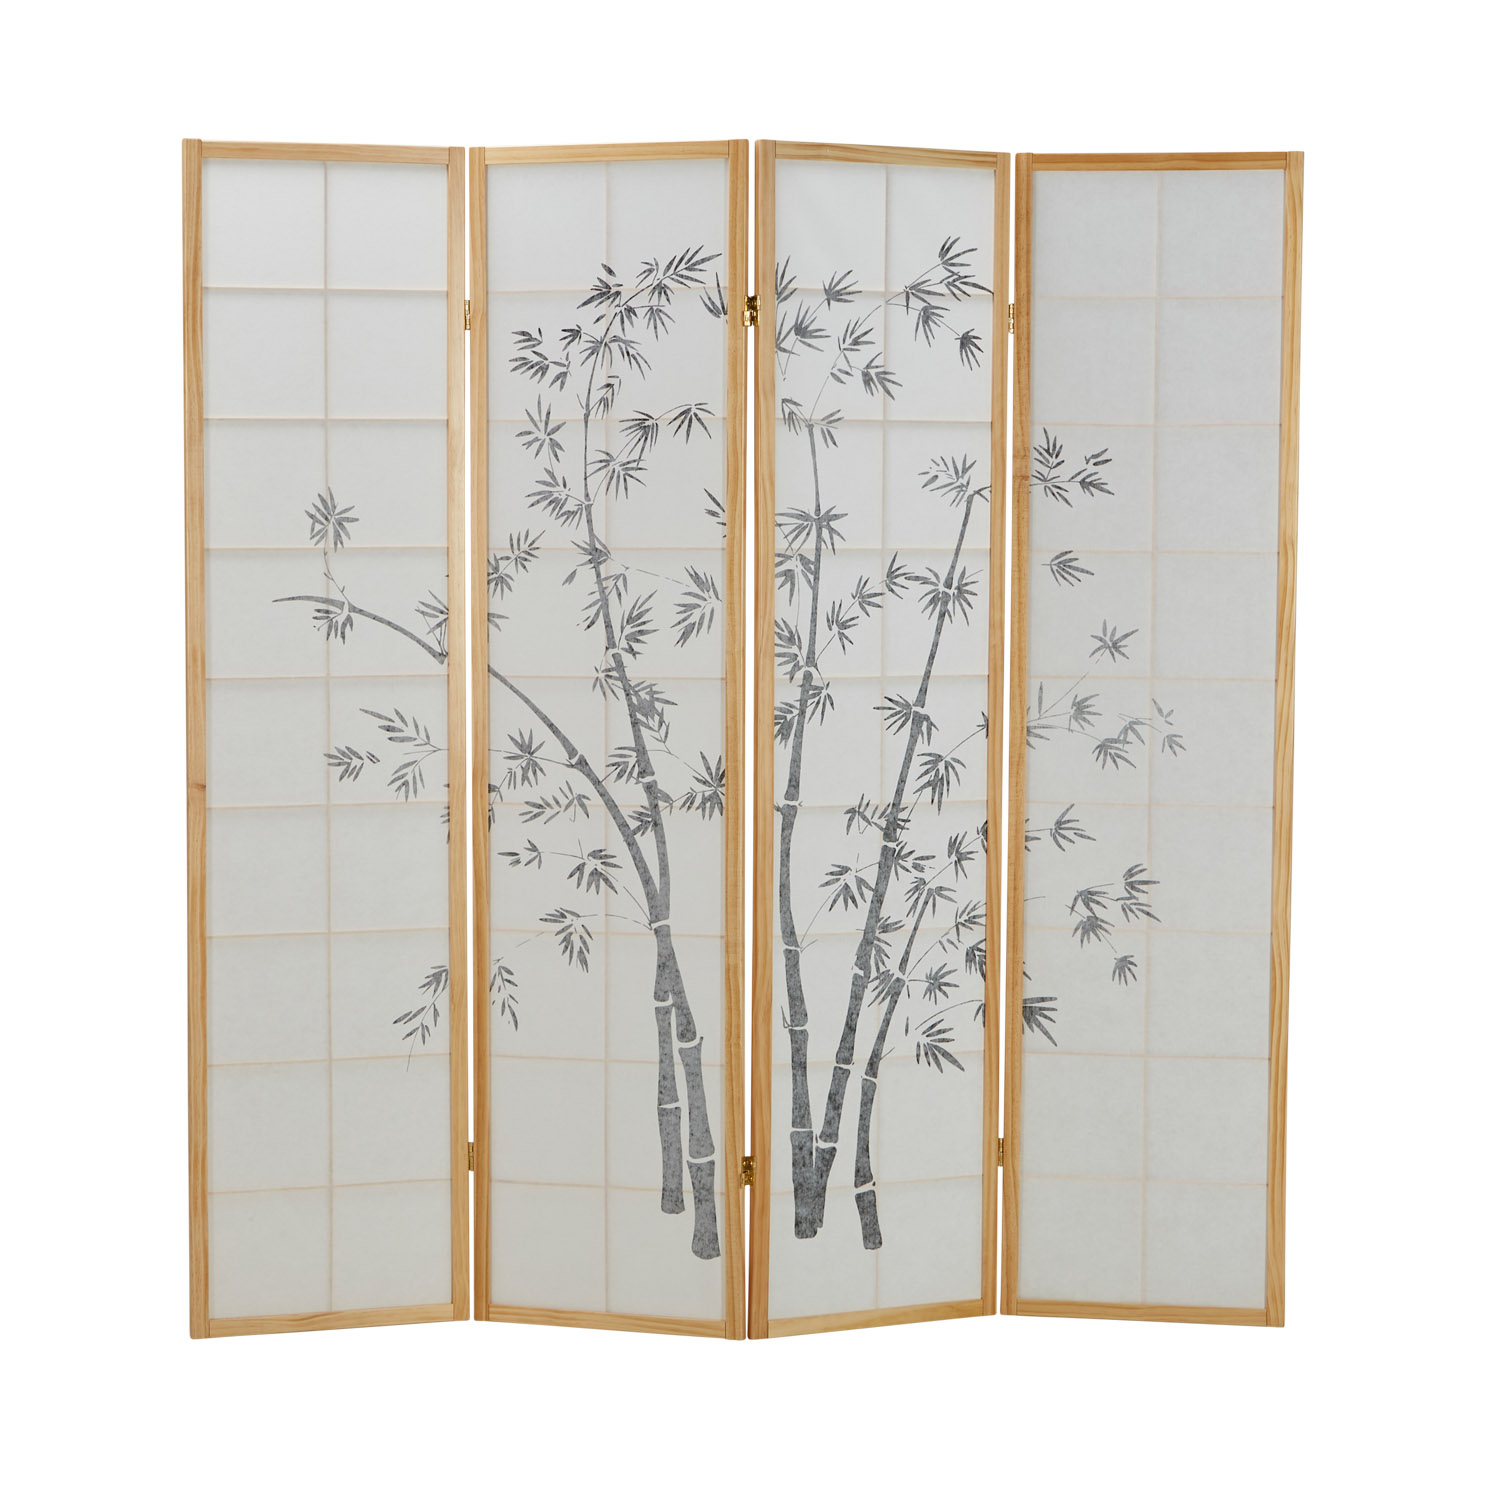 Paravent room divider 3 parts, natural wood, white rice paper, bamboo pattern, height 179 cm